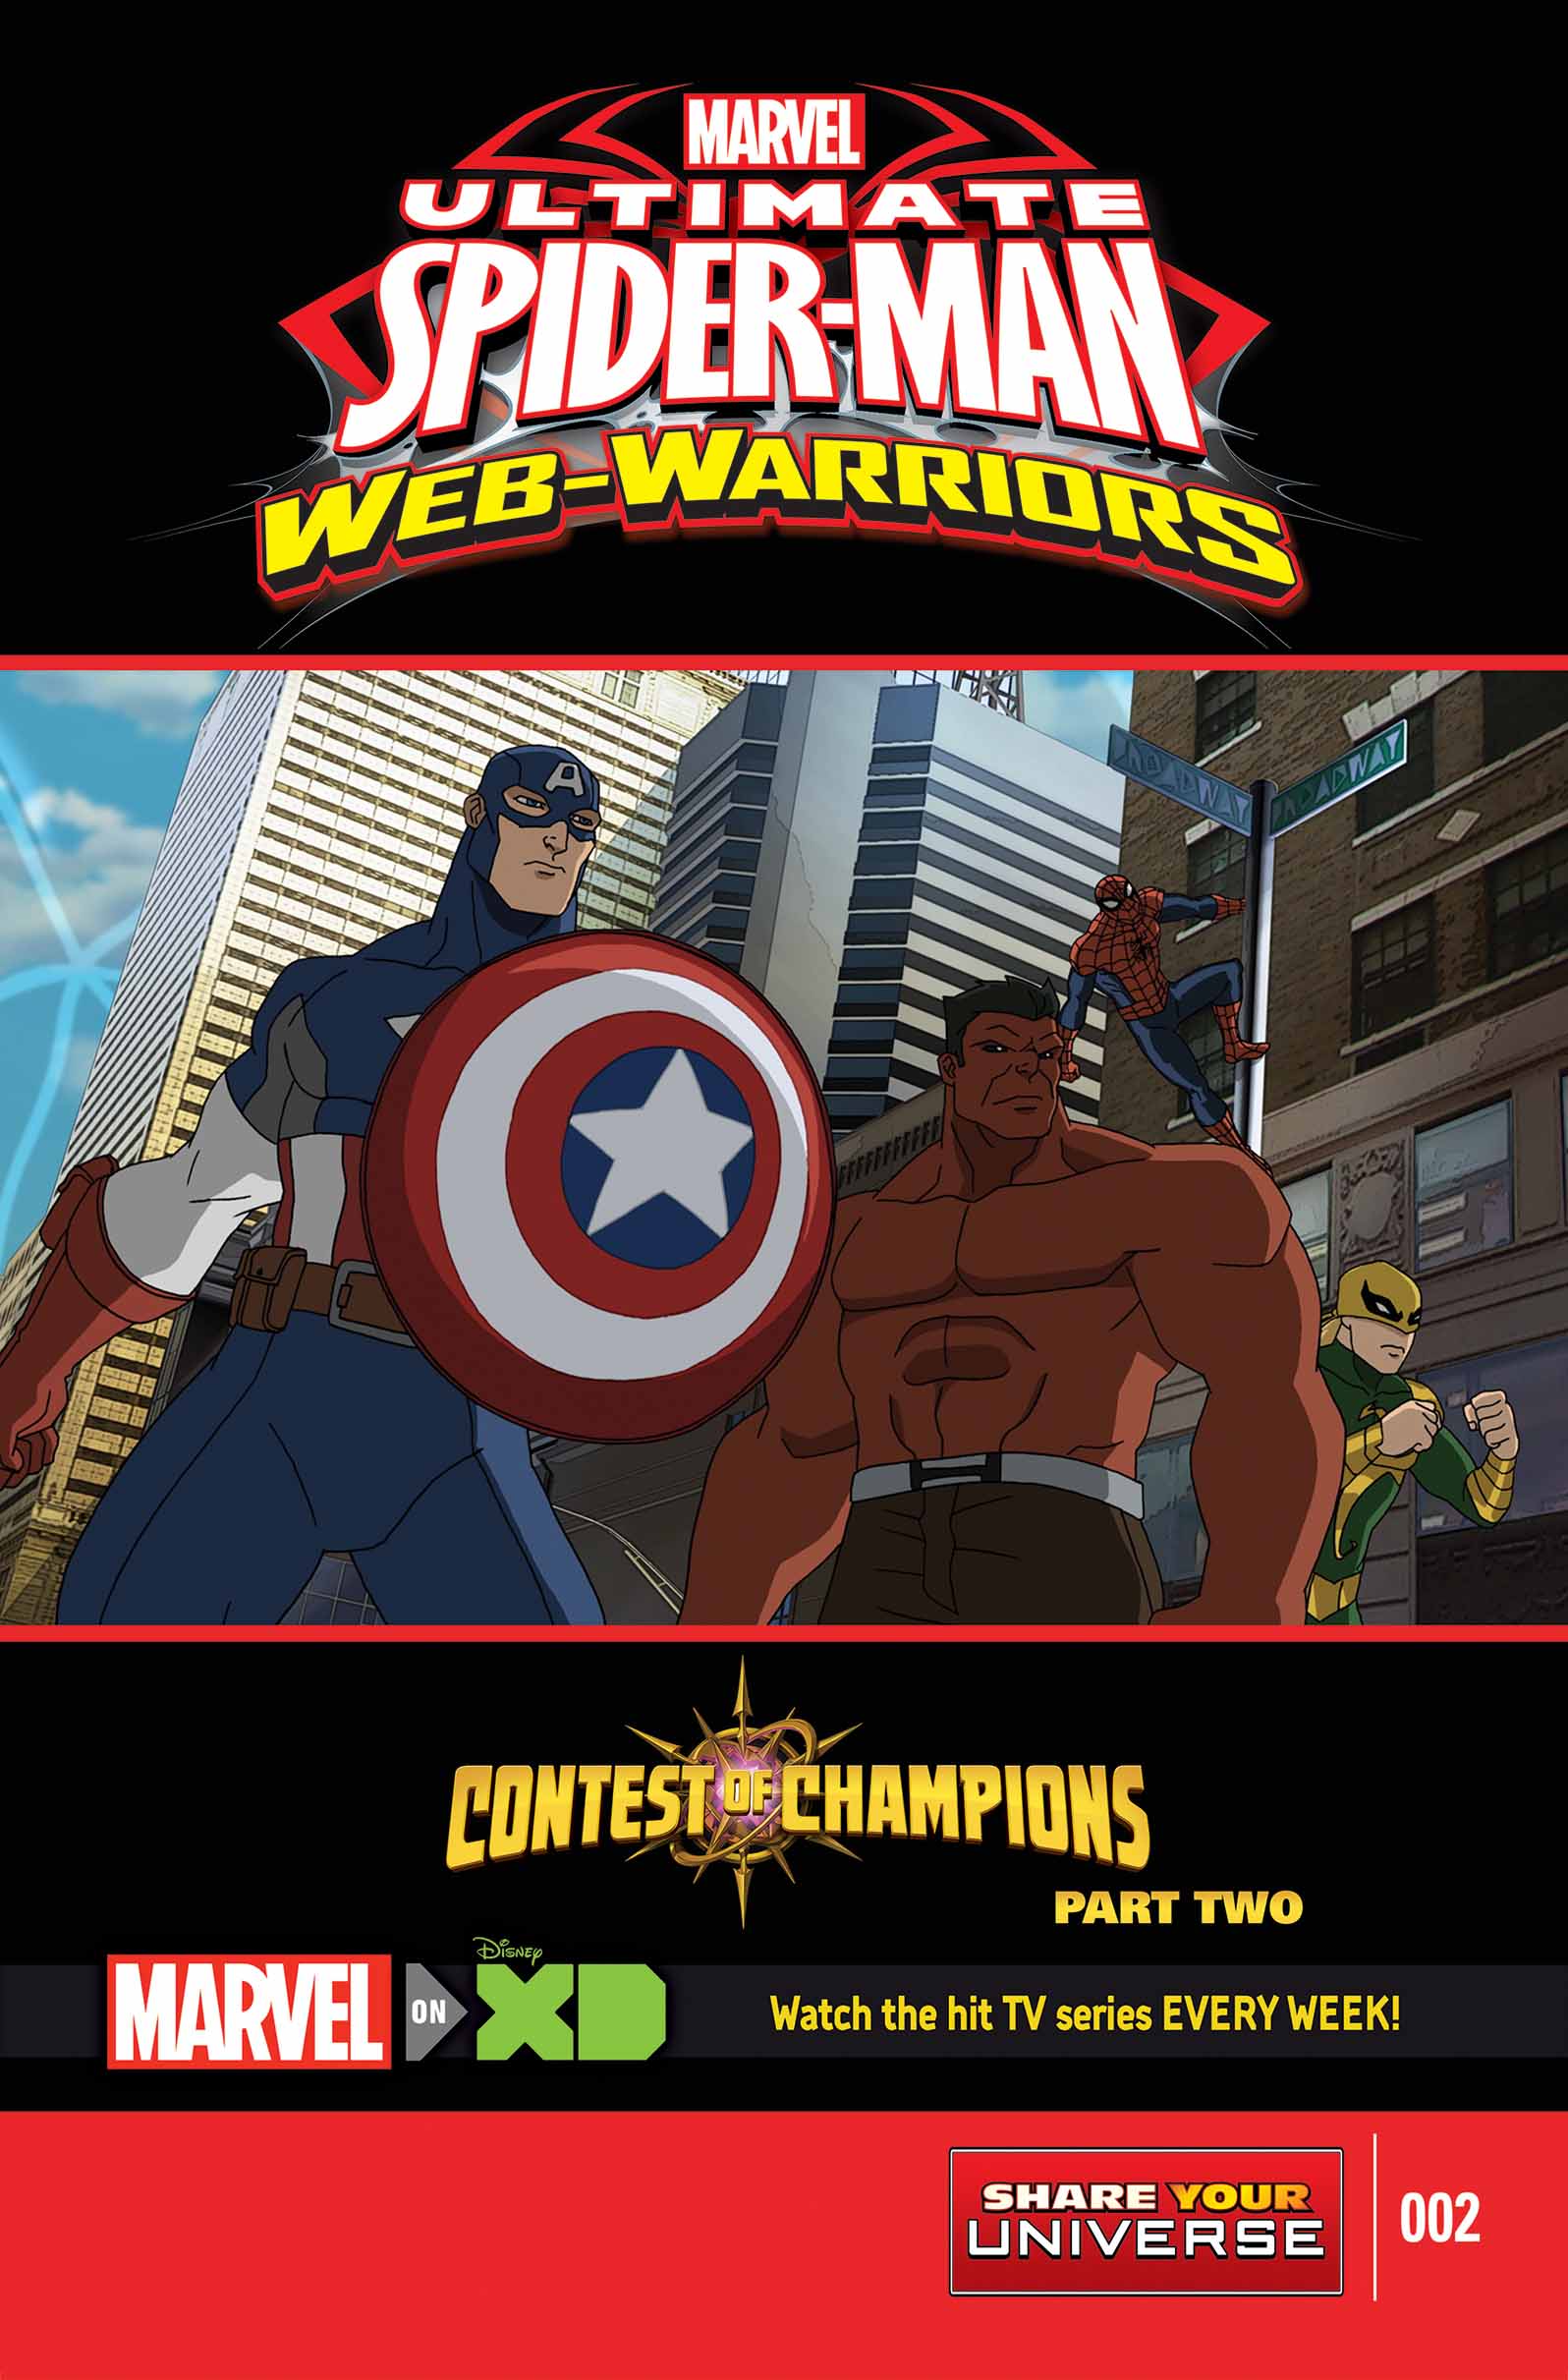 MARVEL UNIVERSE ULTIMATE SPIDER-MAN: CONTEST OF CHAMPIONS #2